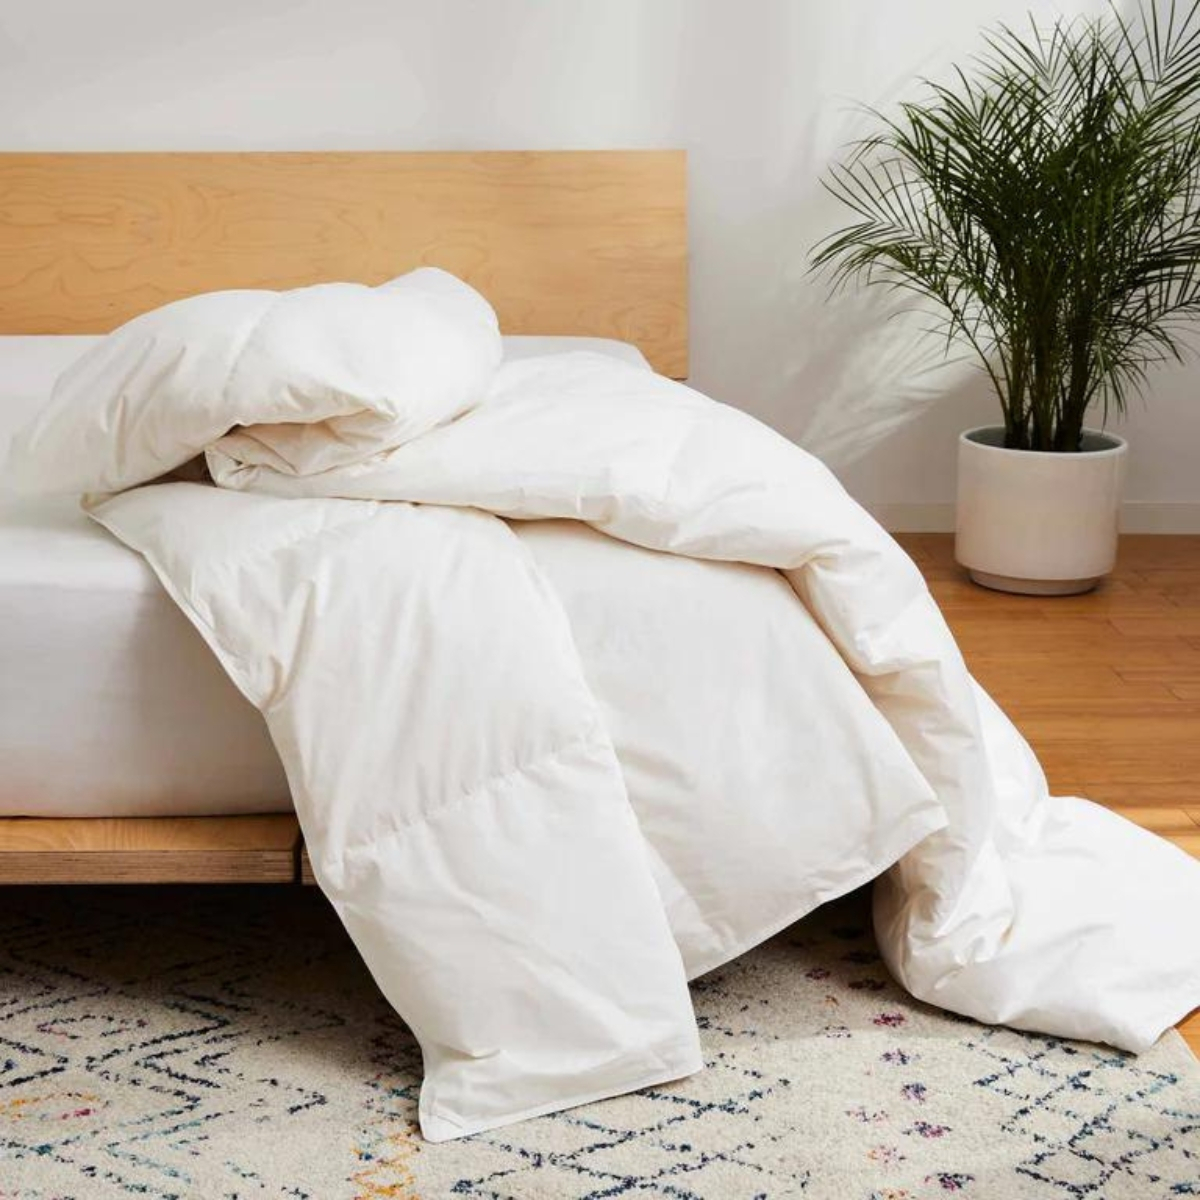 The Best Summertime Comforters That’ll Keep You…